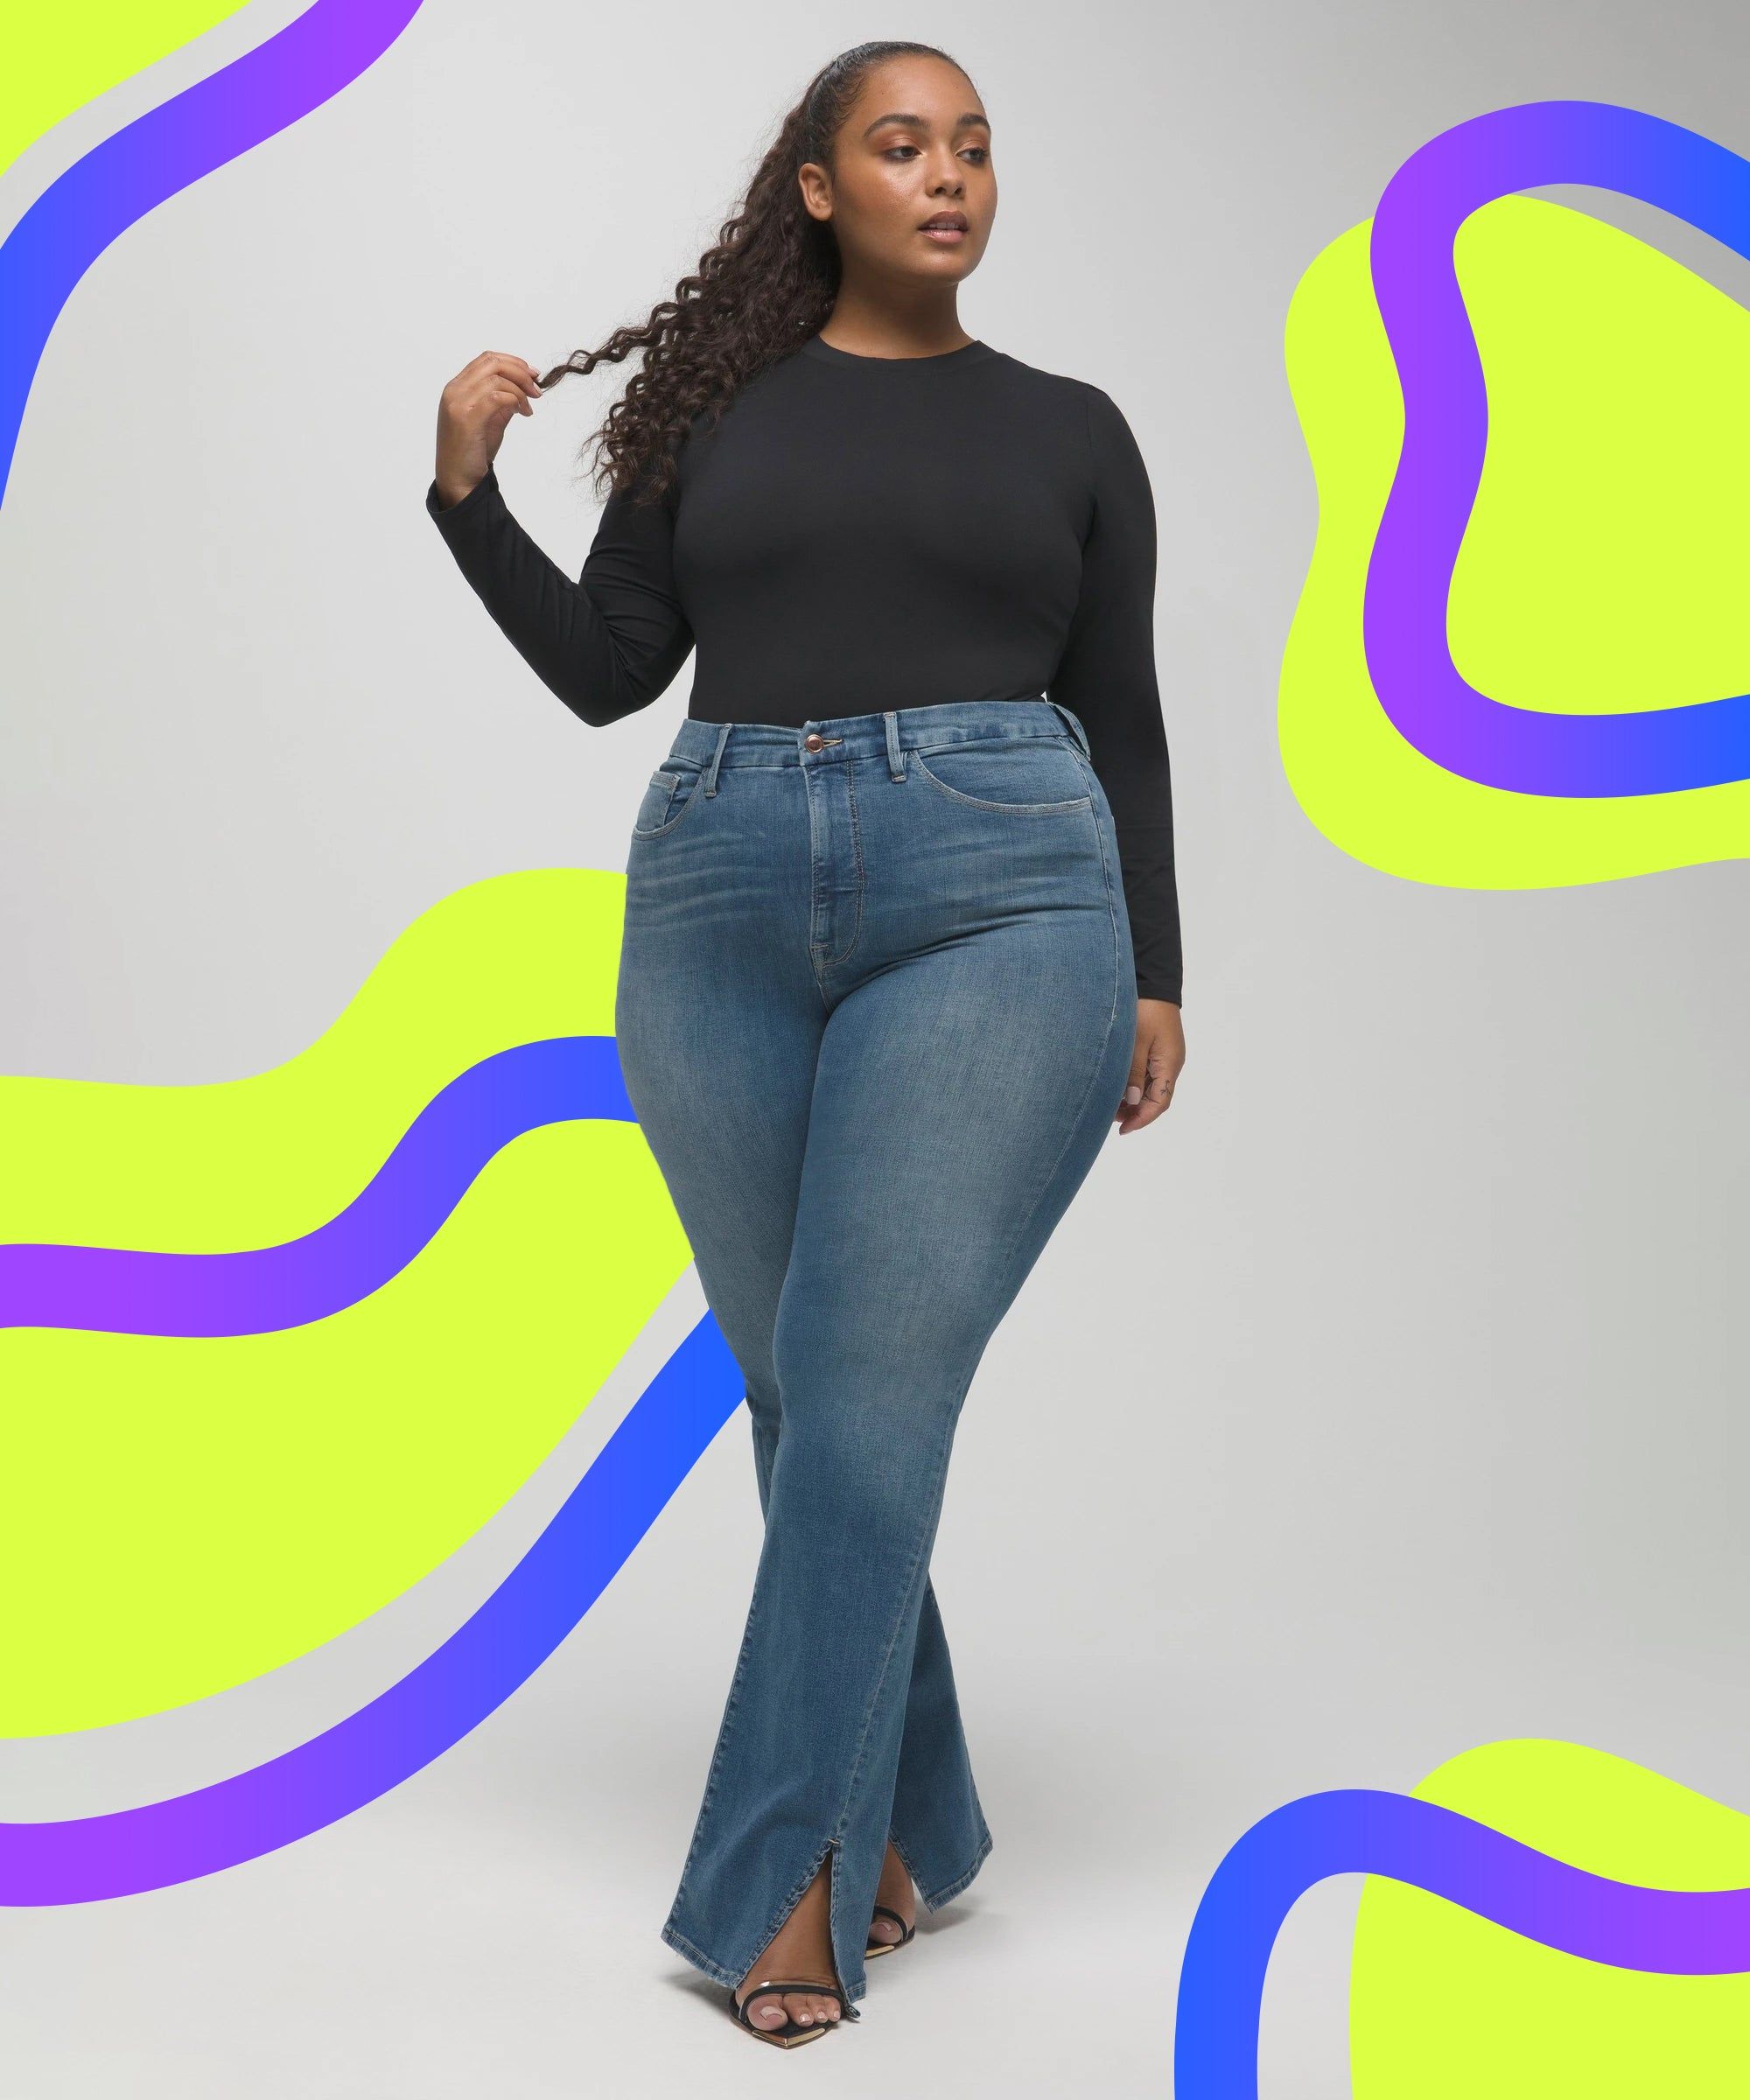 Why Finding A Good Pair Of Jeans Is A "Nightmare" For Plus-Size Women